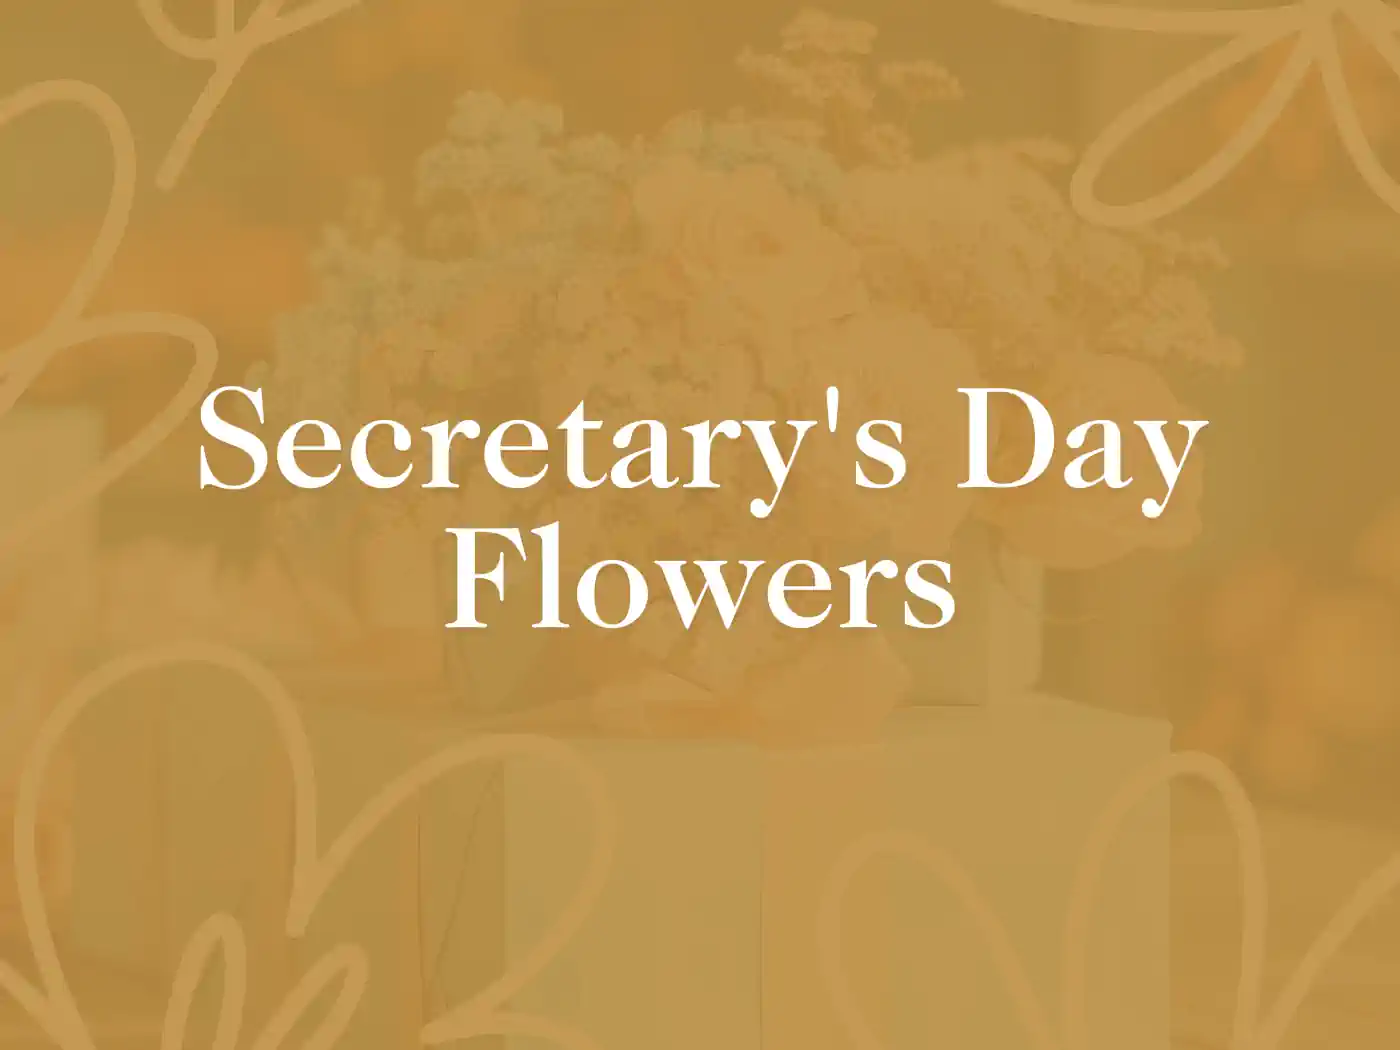 Elegant promotional image for Secretary's Day featuring soft-focus flowers in warm tones with the text 'Secretary's Day Flowers' prominently displayed. Celebrate with meaningful gestures from Fabulous Flowers and Gifts, delivered with heart.